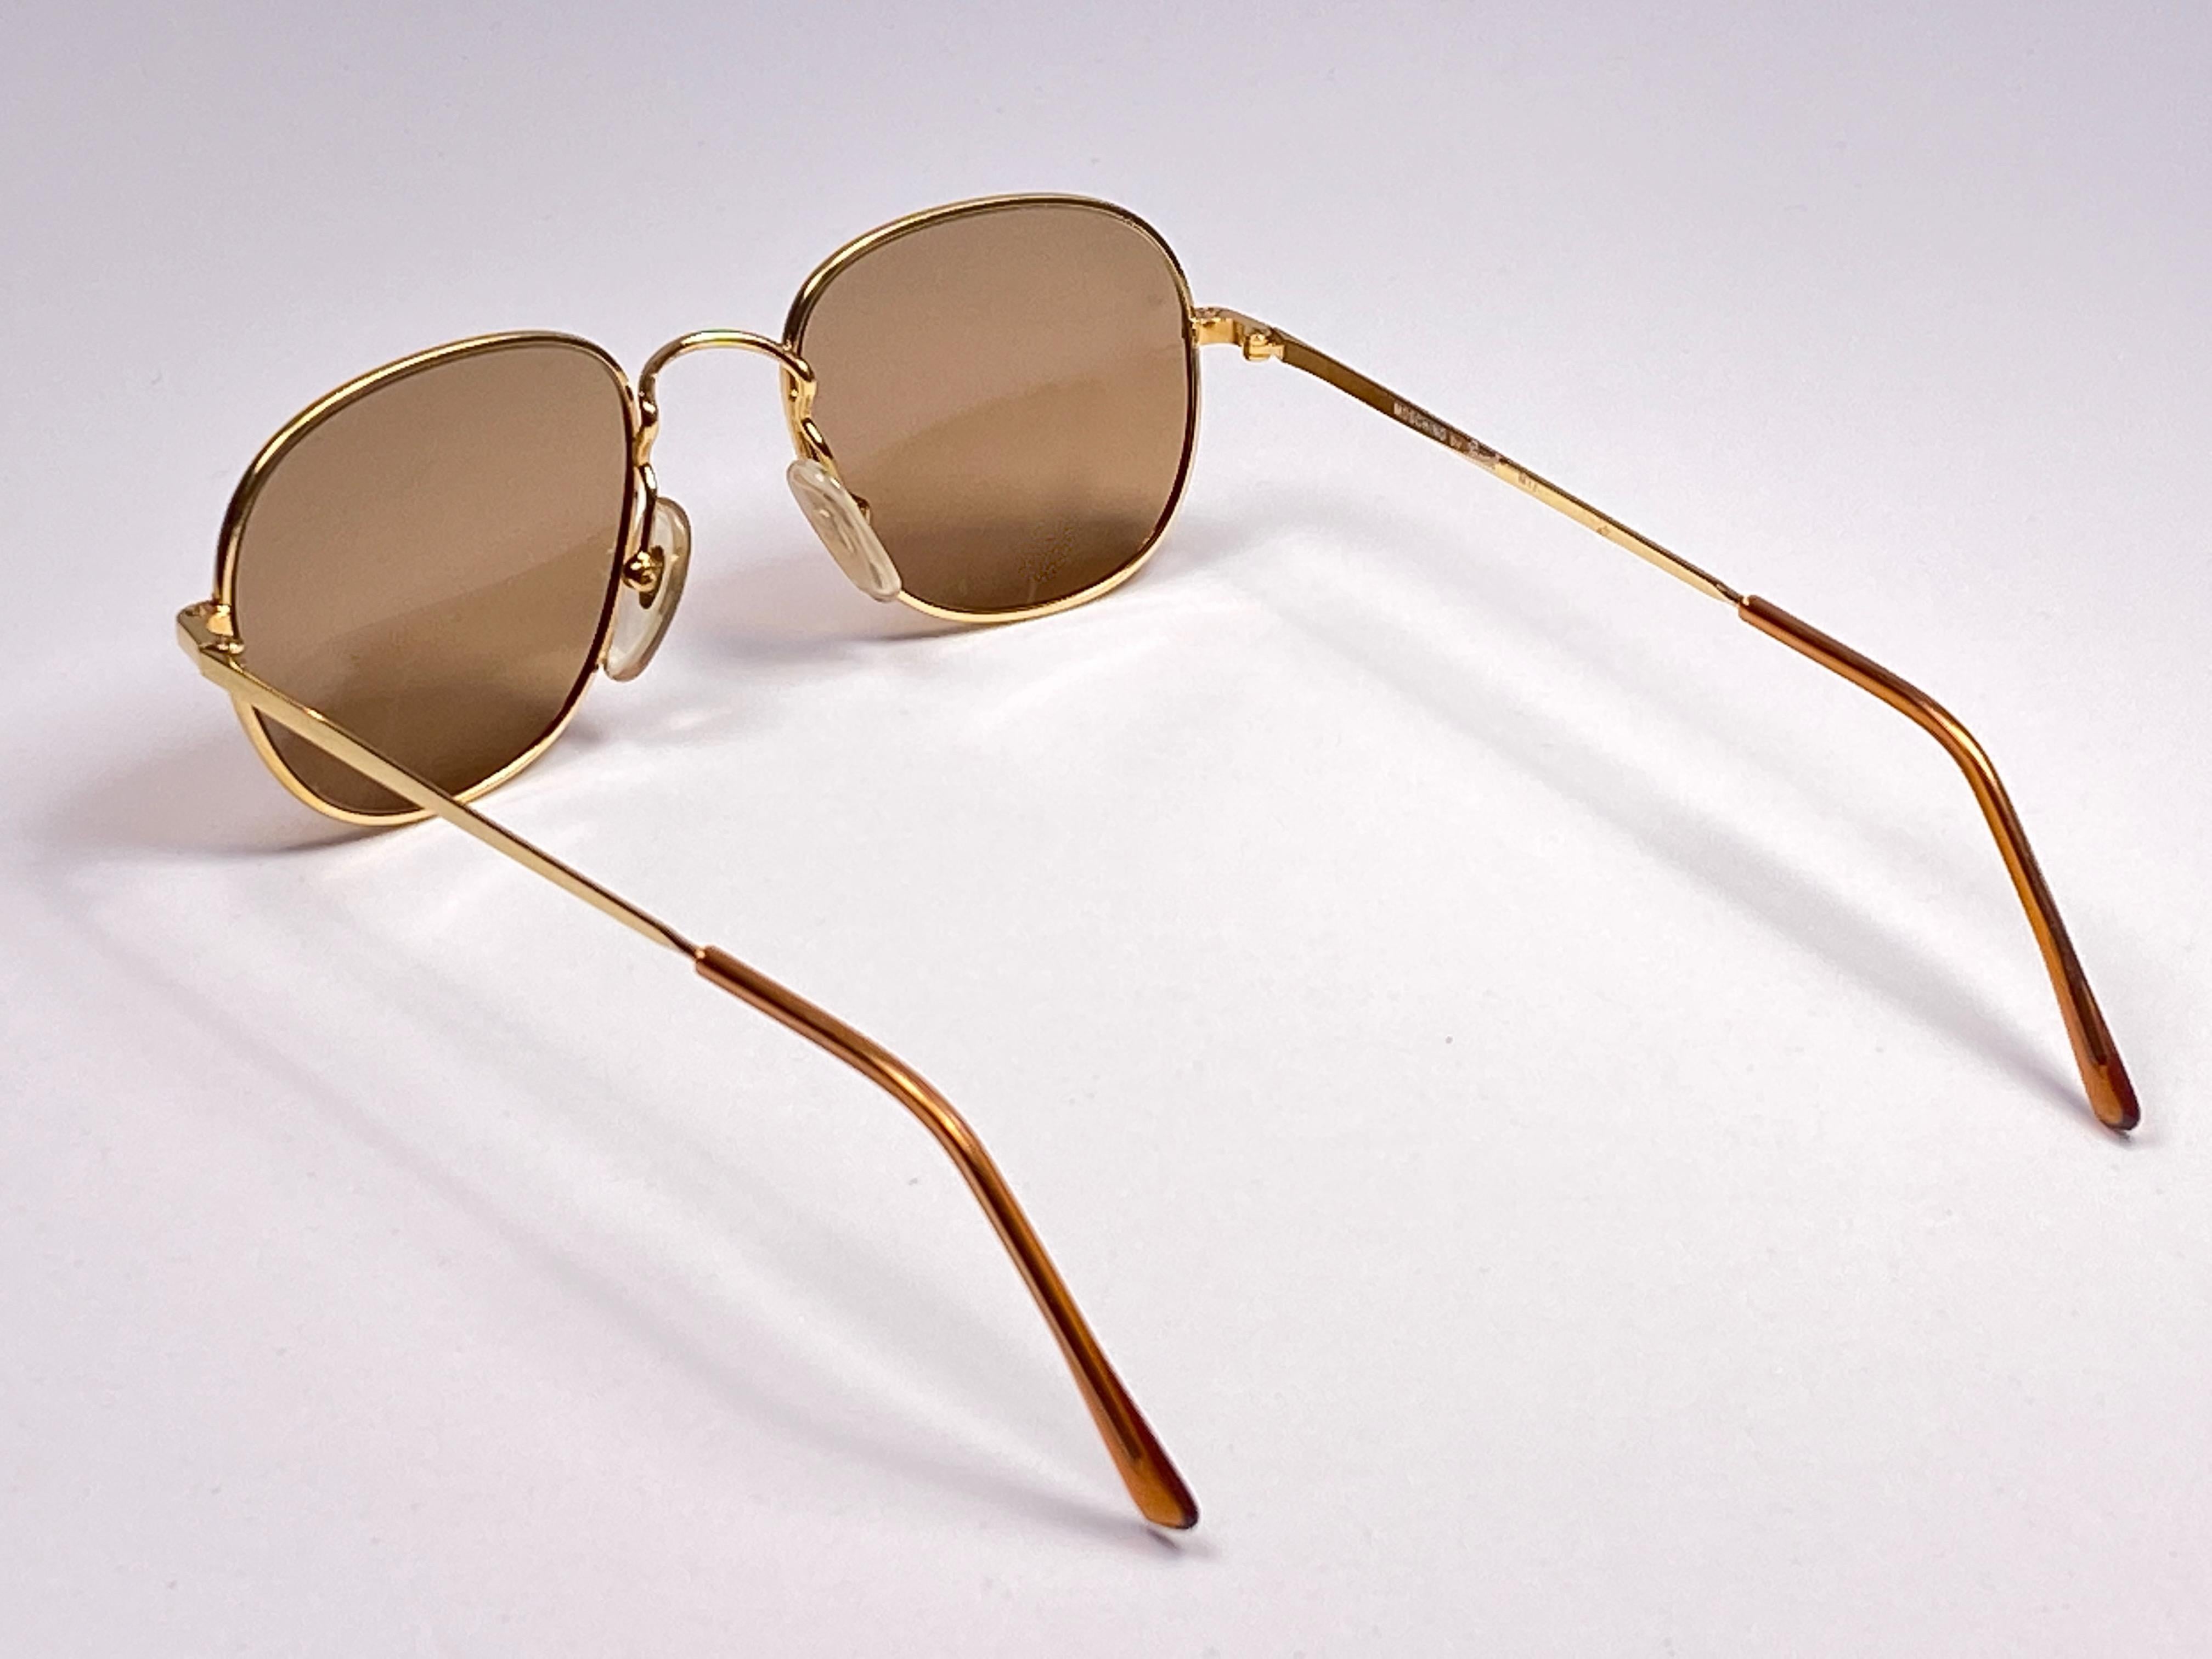 New Vintage Moschino By Persol M17 Gold Mirror Sunglasses Made in Italy For Sale 1